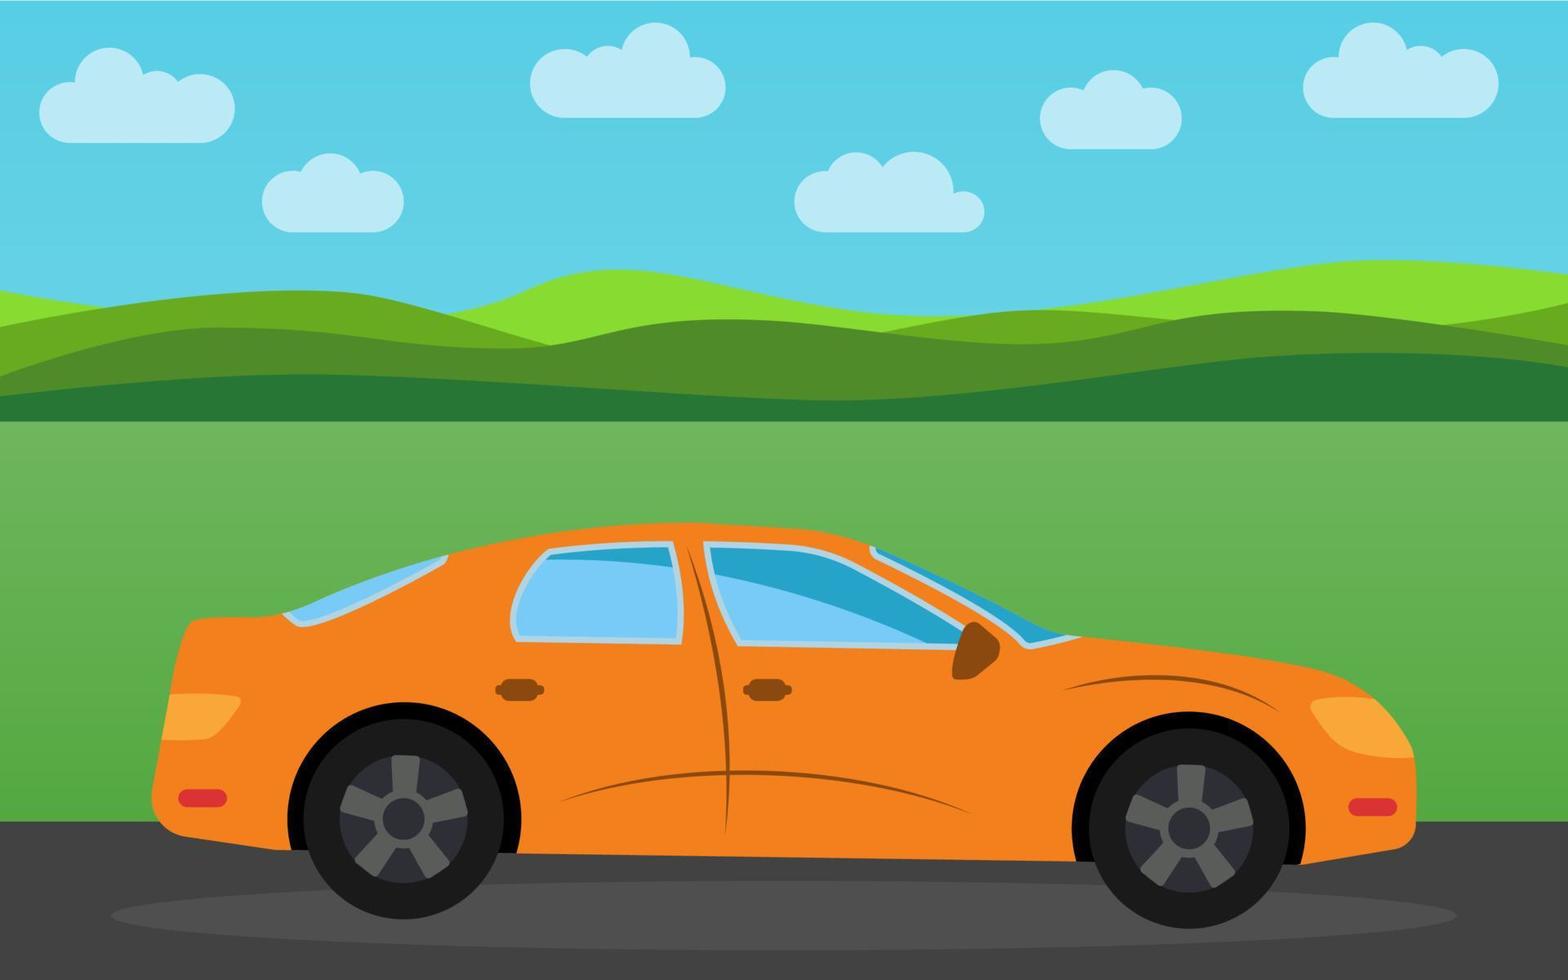 Orange sports car in the background of nature landscape in the daytime. Vector illustration.